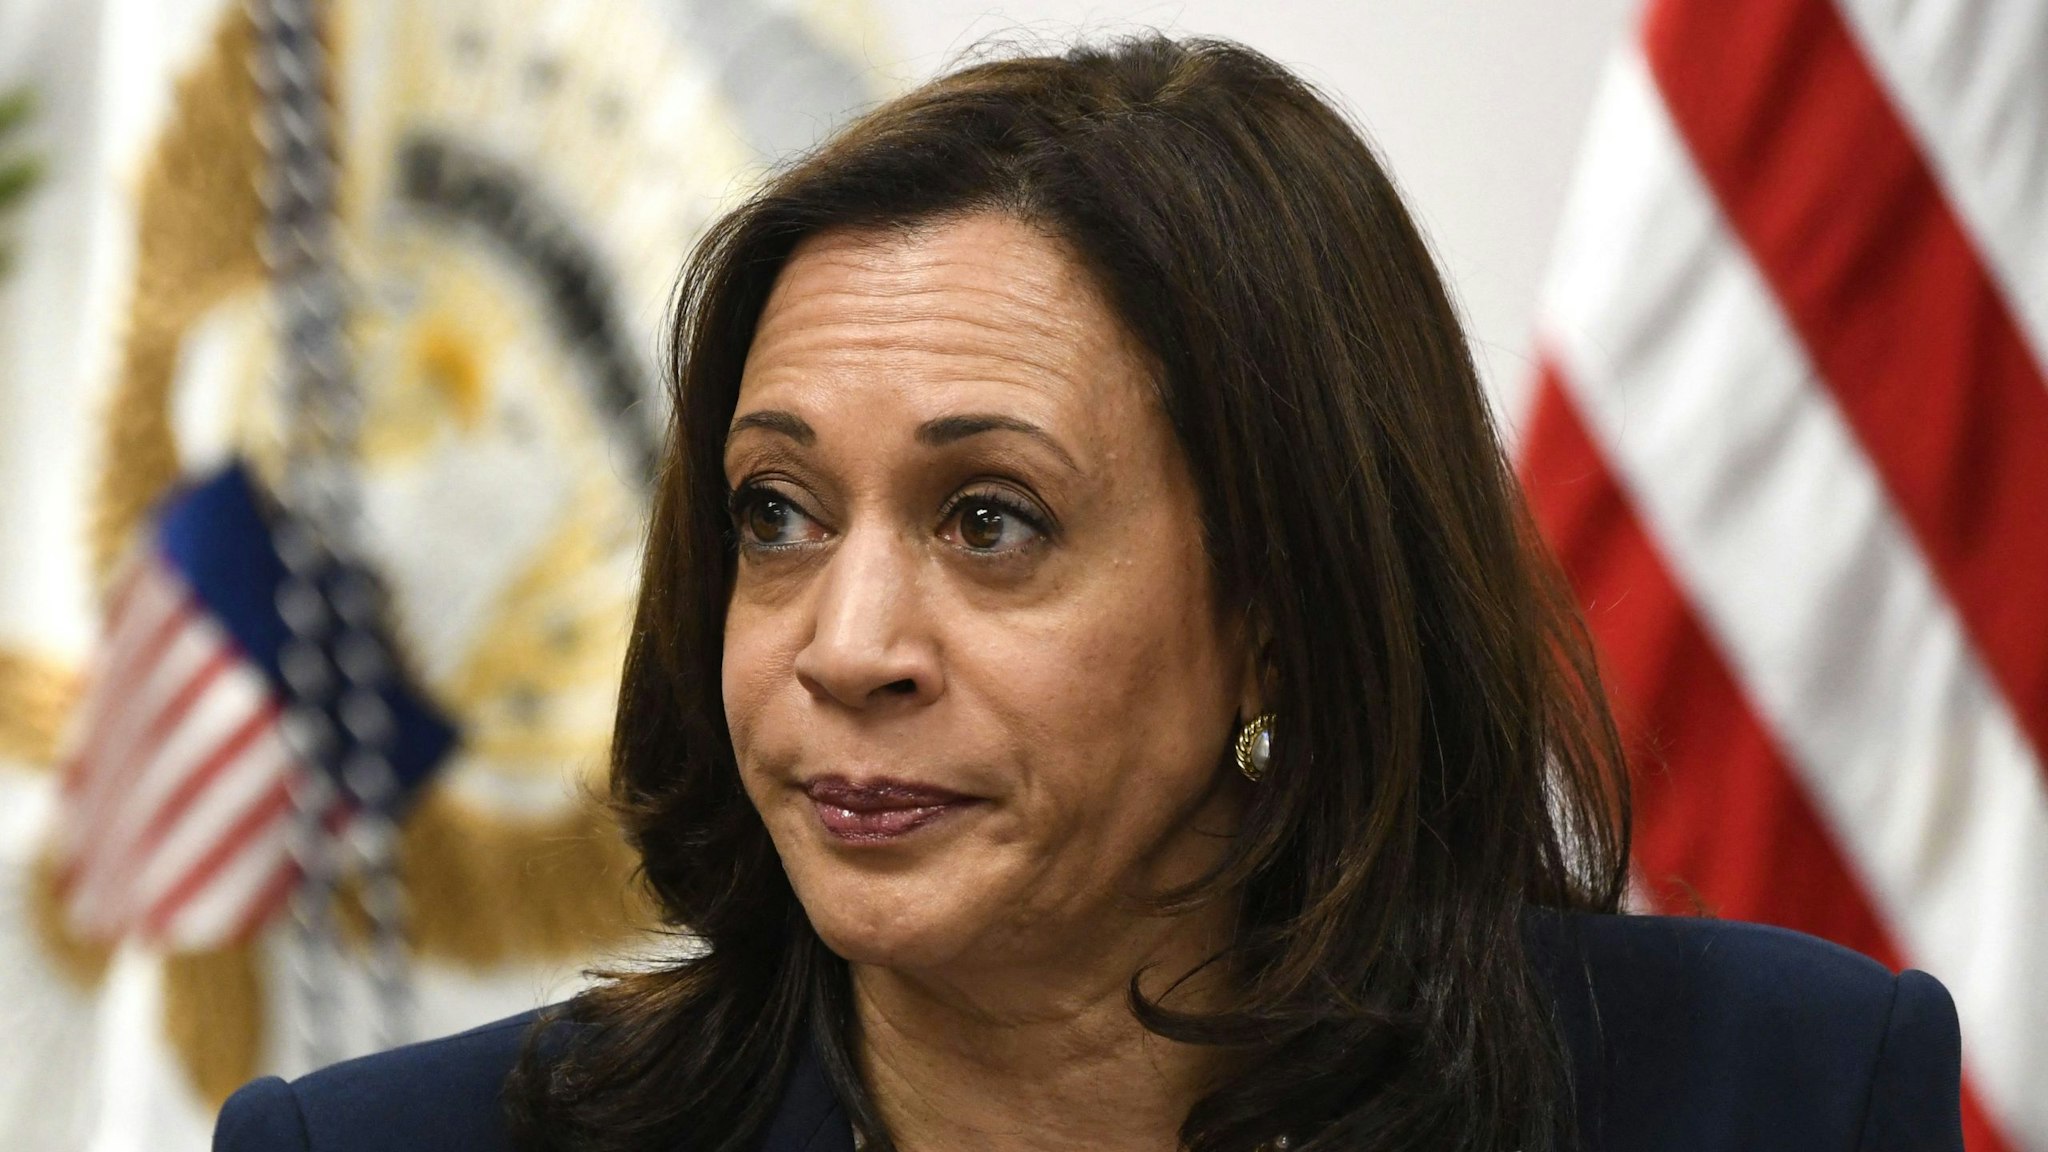 US Vice President Kamala Harris participates in a roundtable discussion with advocates from faith-based NGOs and shelter and legal service providers, during a visit to the Paso del Norte Port of Entry on June 25, 2021 in El Paso, Texas. - Vice President Kamala Harris is traveling in El Paso, Texas on Friday, where she will tour a Customs and Border Protection processing facility, meeting with advocates and NGOs.